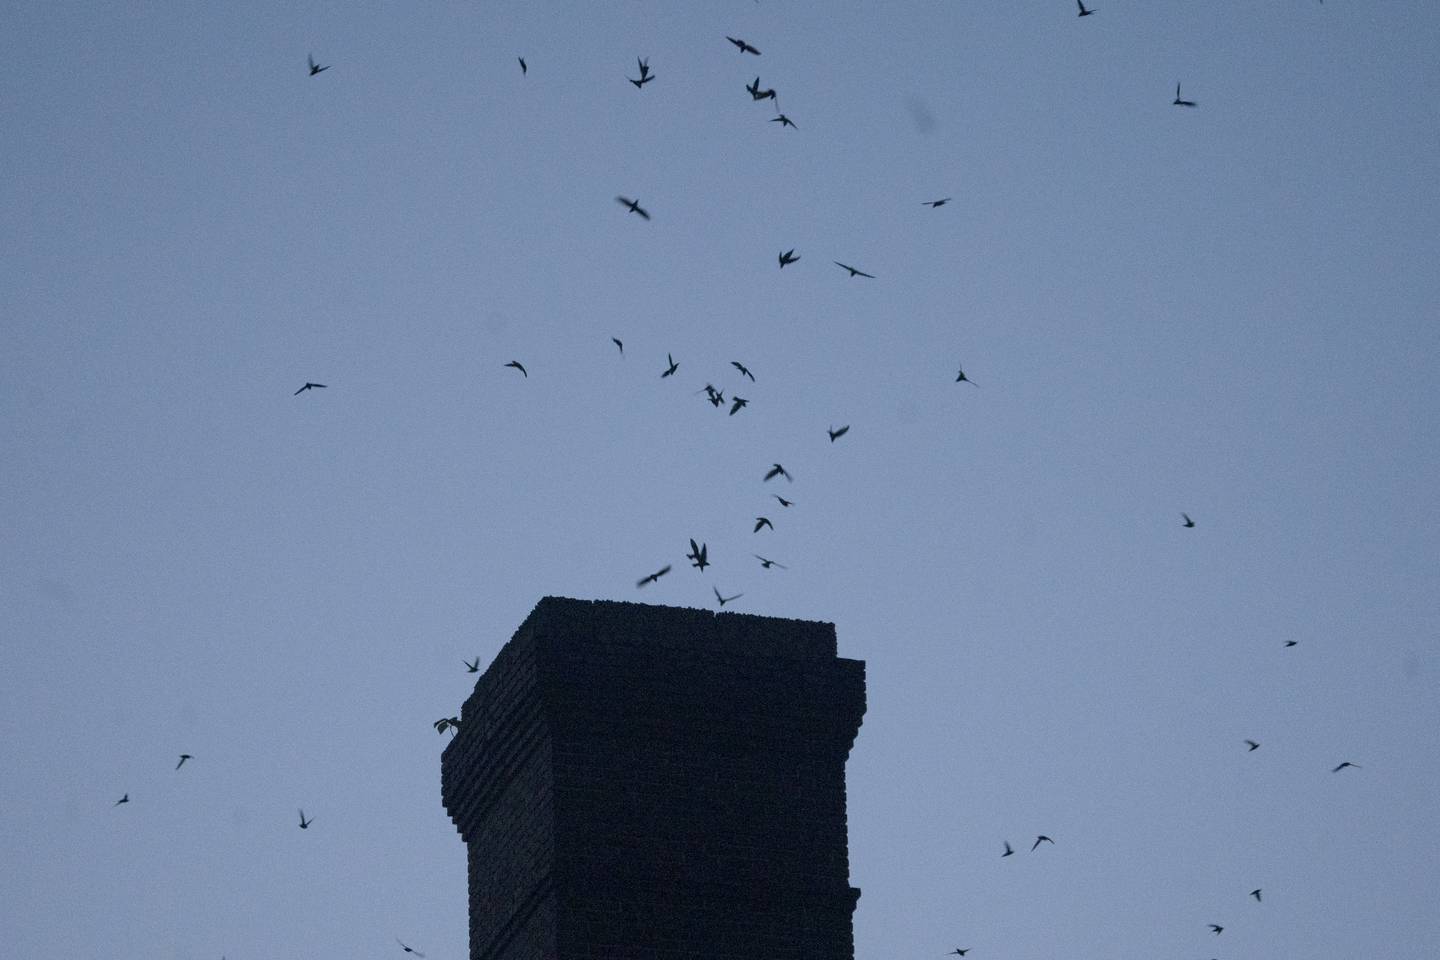 Each September, thousands of chimney swifts spend the night  in Hampden's old bookbindery as they journey from Canada to South America. This year, could be the last as the building has been purchased and possibly slated for demolition.